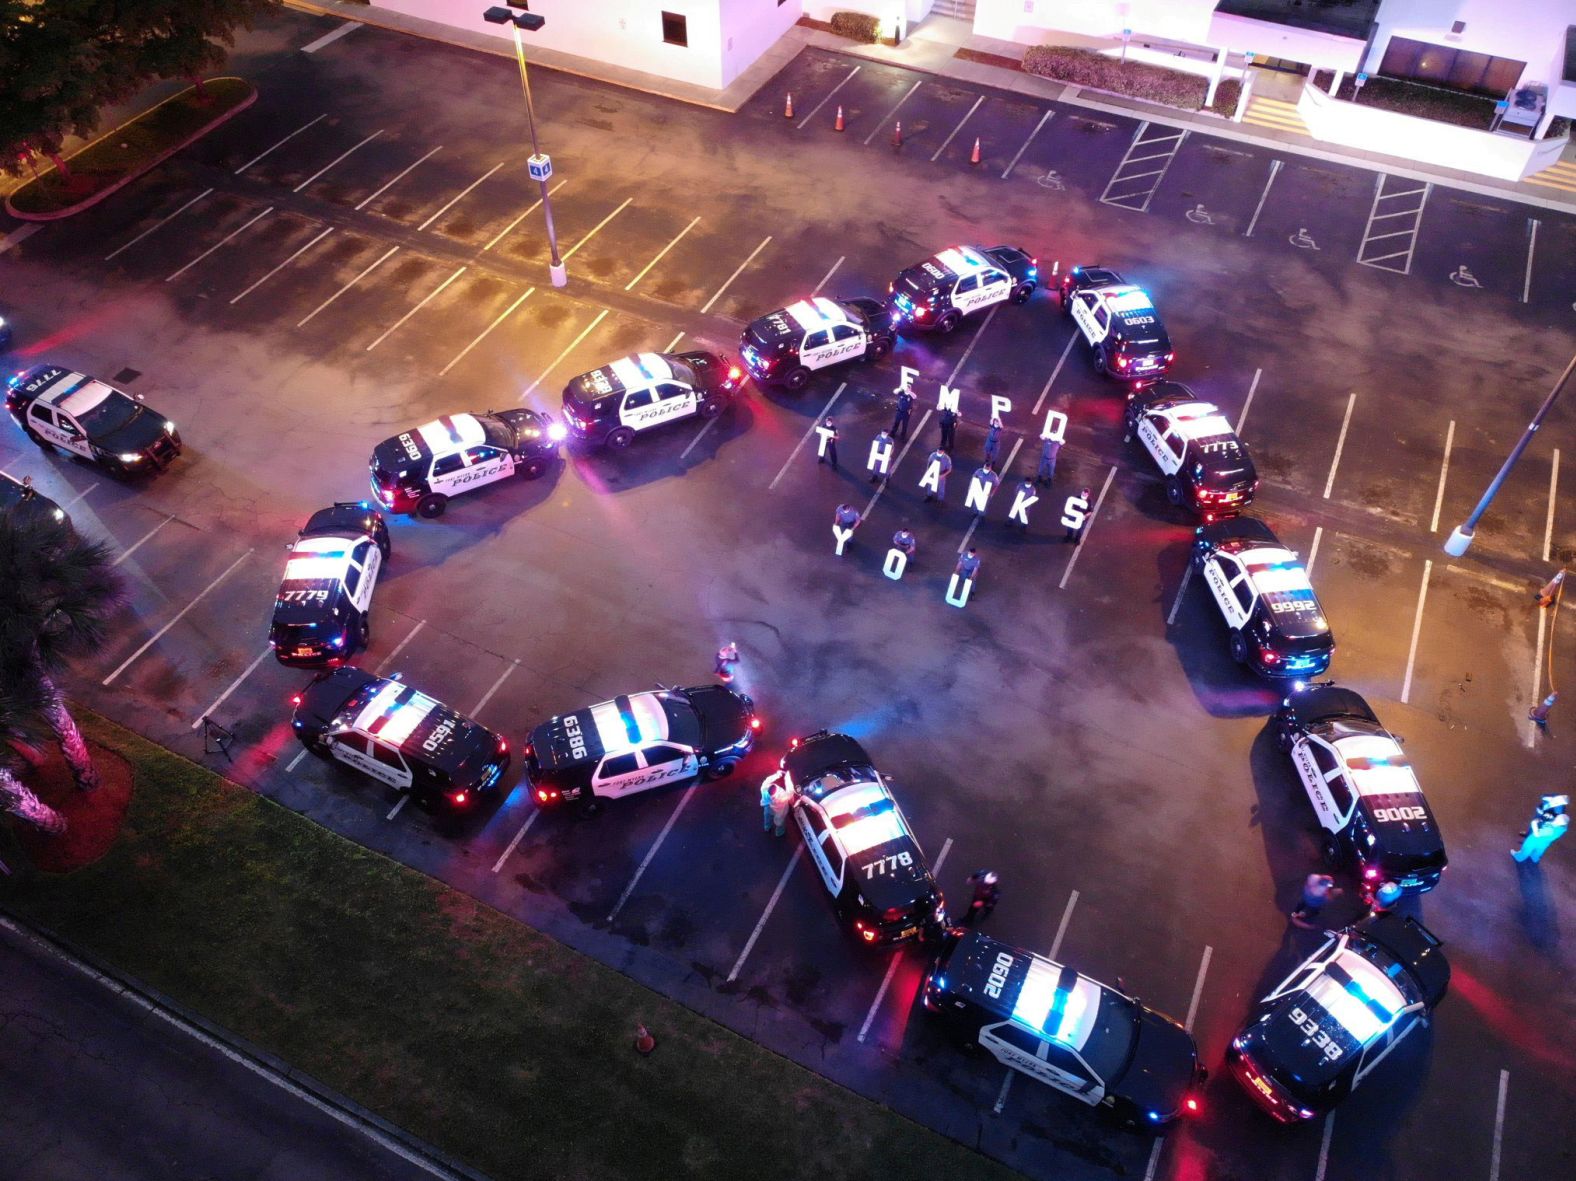 The Fort Myers Police Department made a heart out of police cars on April 16 to thank health-care workers at Lee Memorial Hospital in Fort Myers, Florida.